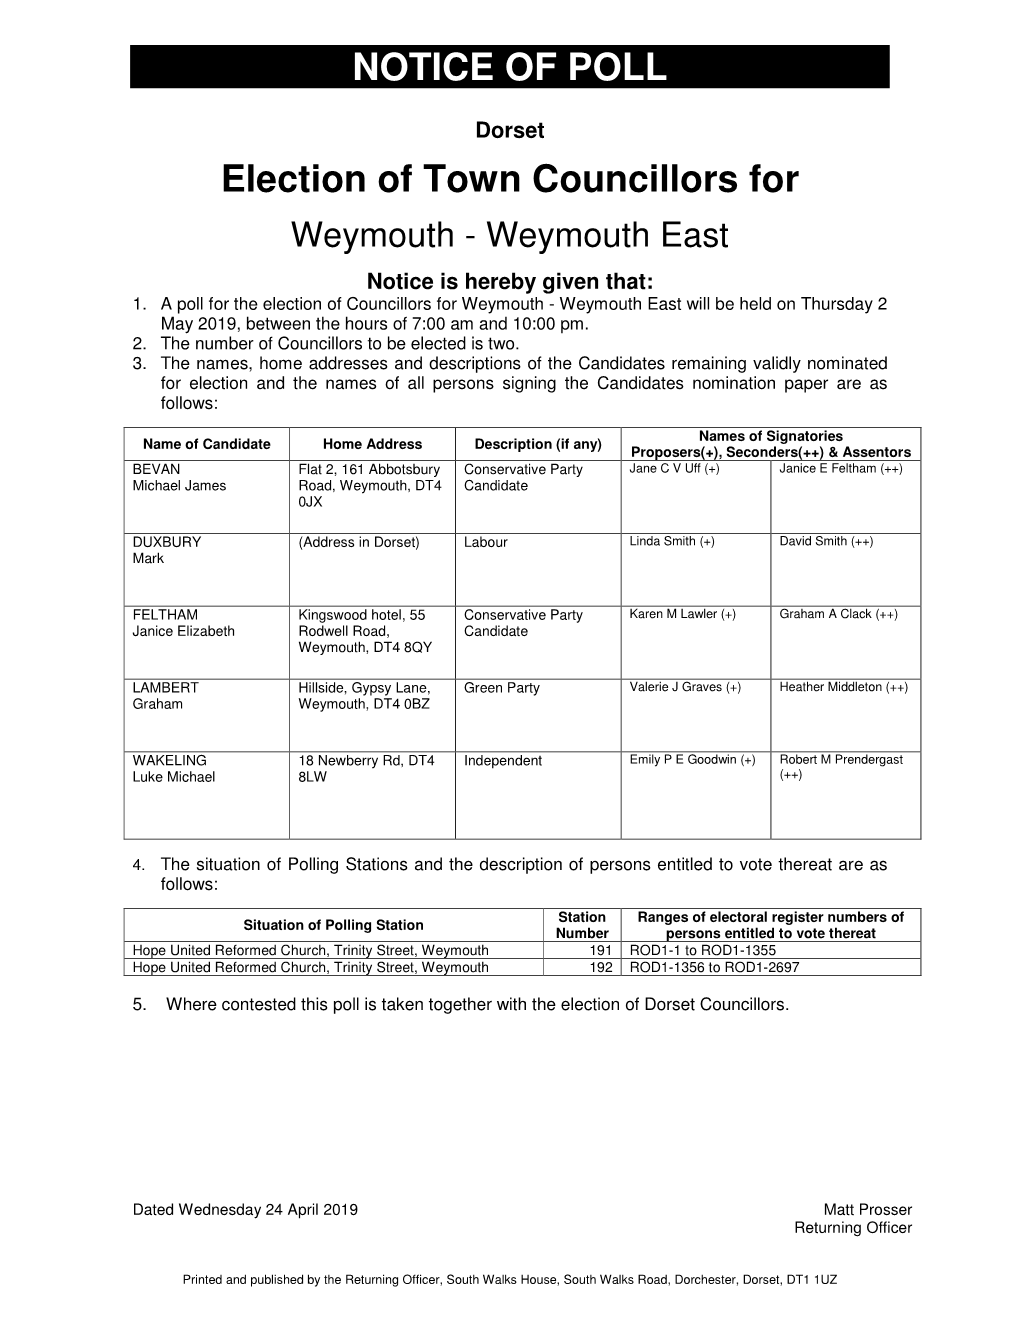 NOTICE of POLL Election of Town Councillors